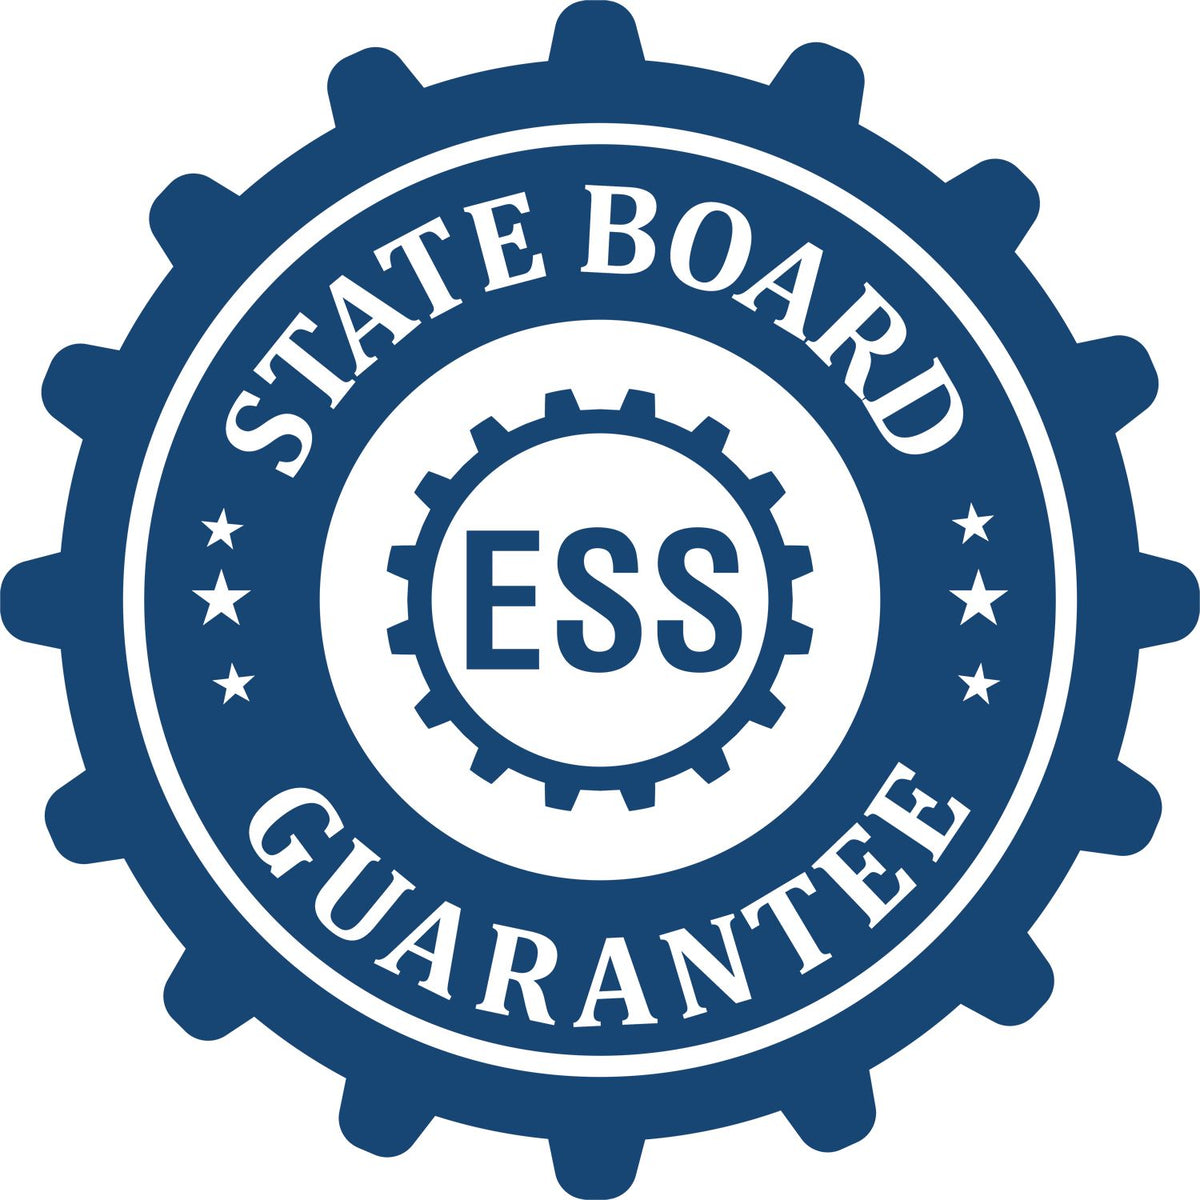 An emblem in a gear shape illustrating a state board guarantee for the Extended Long Reach Alabama Surveyor Embosser product.